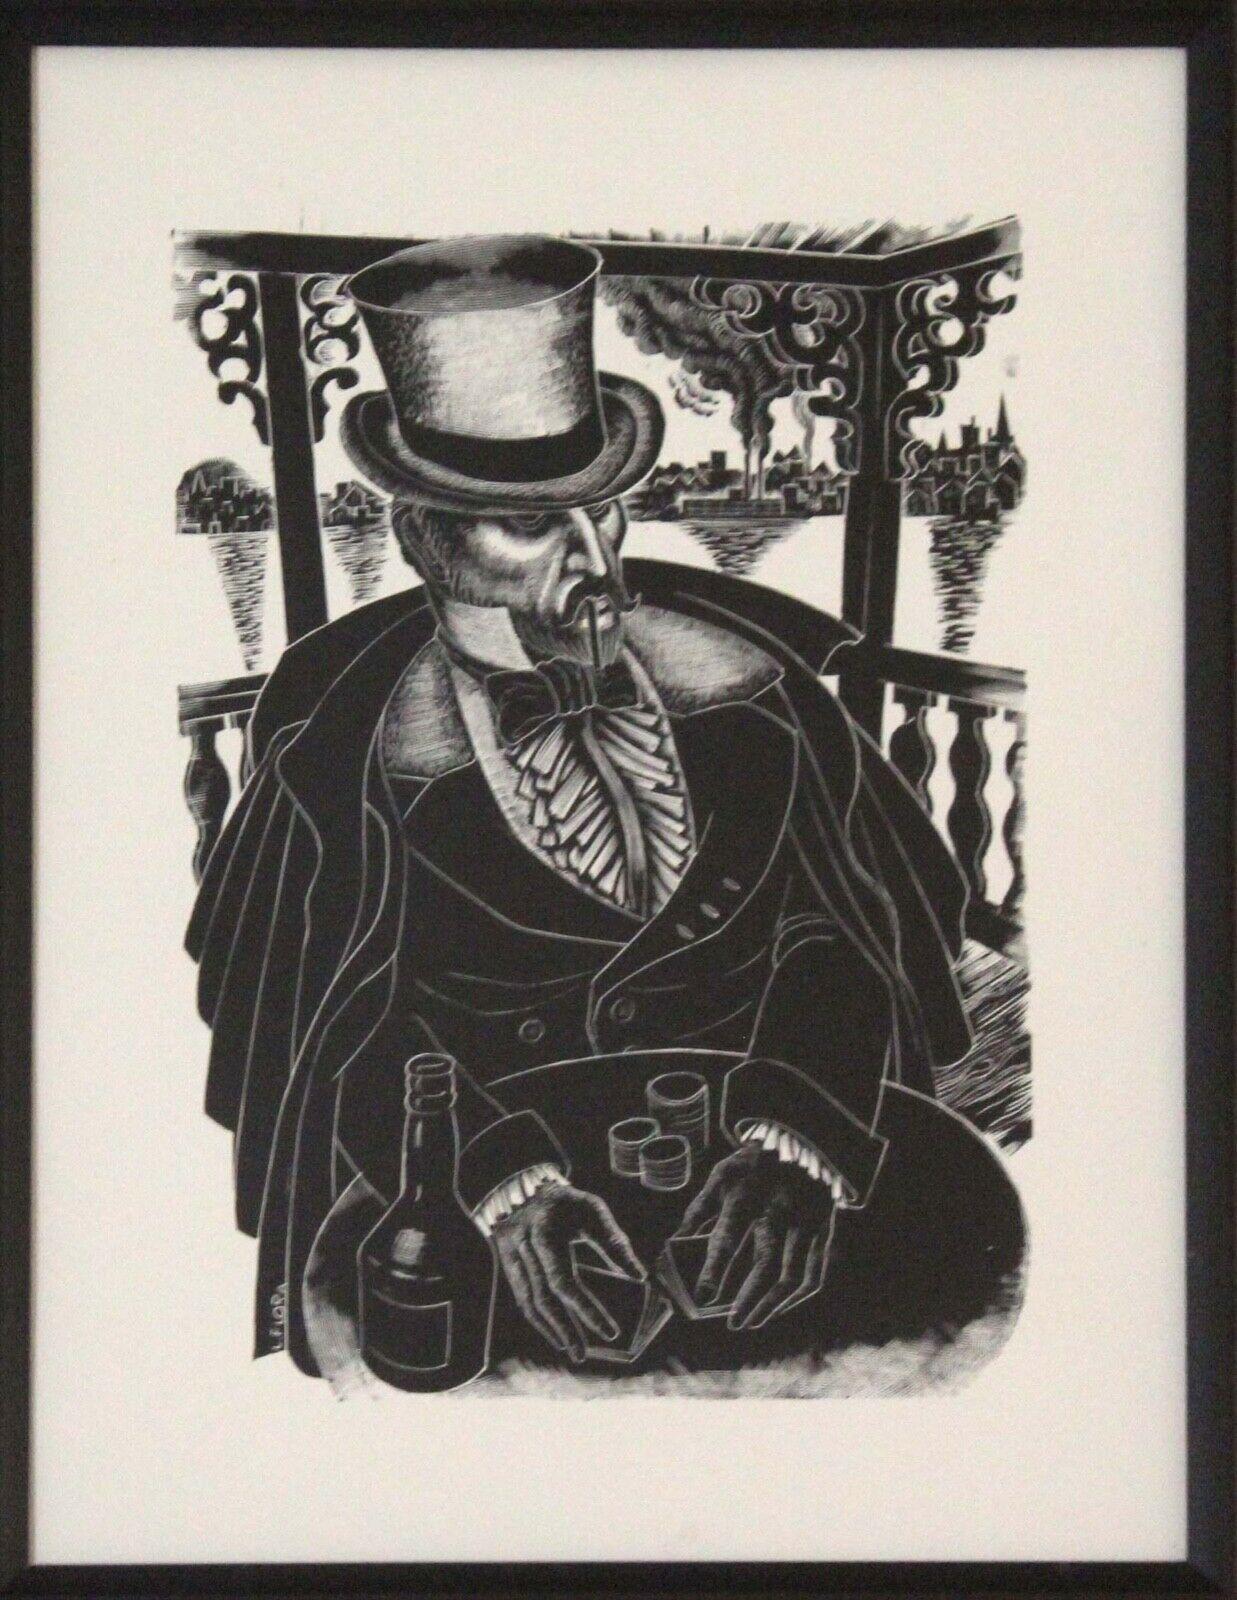 Le Shoppe Too in Michigan is offering a fanciful woodcut print depicting a distinguished gentleman shuffling playing cards by Jim Flora. Signed in the plate on the lower left. The style in which the woodcut was created is a nod to early 20th century